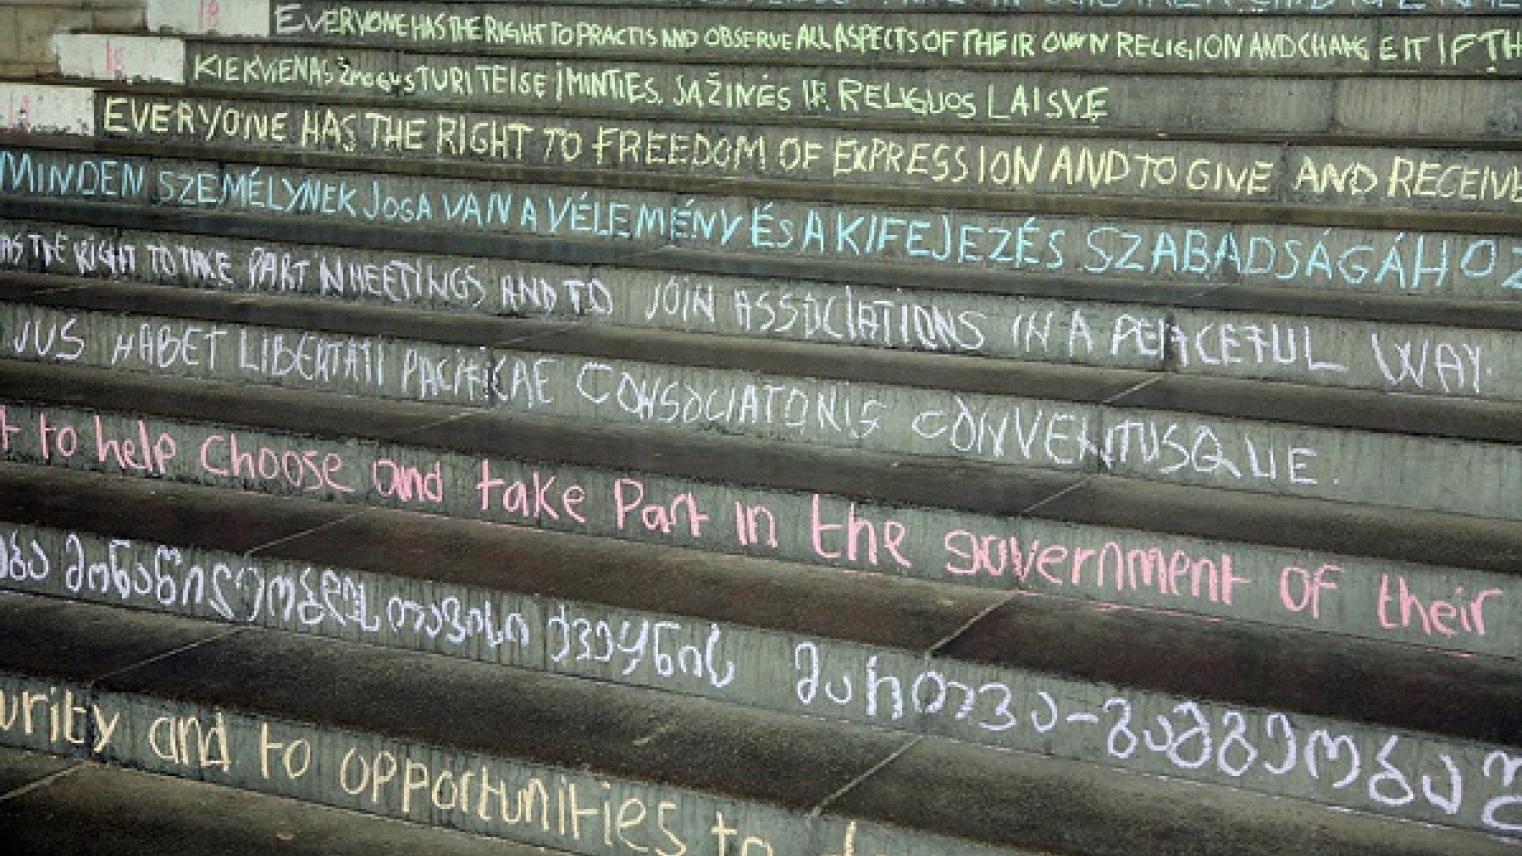 Image of the articles of the Universal Declaration of Human Rights chalked on the steps of University of Essex, by University of Essex at https://flic.kr/p/ifvFD5, free to use under CC BY 2.0 DEED licence 